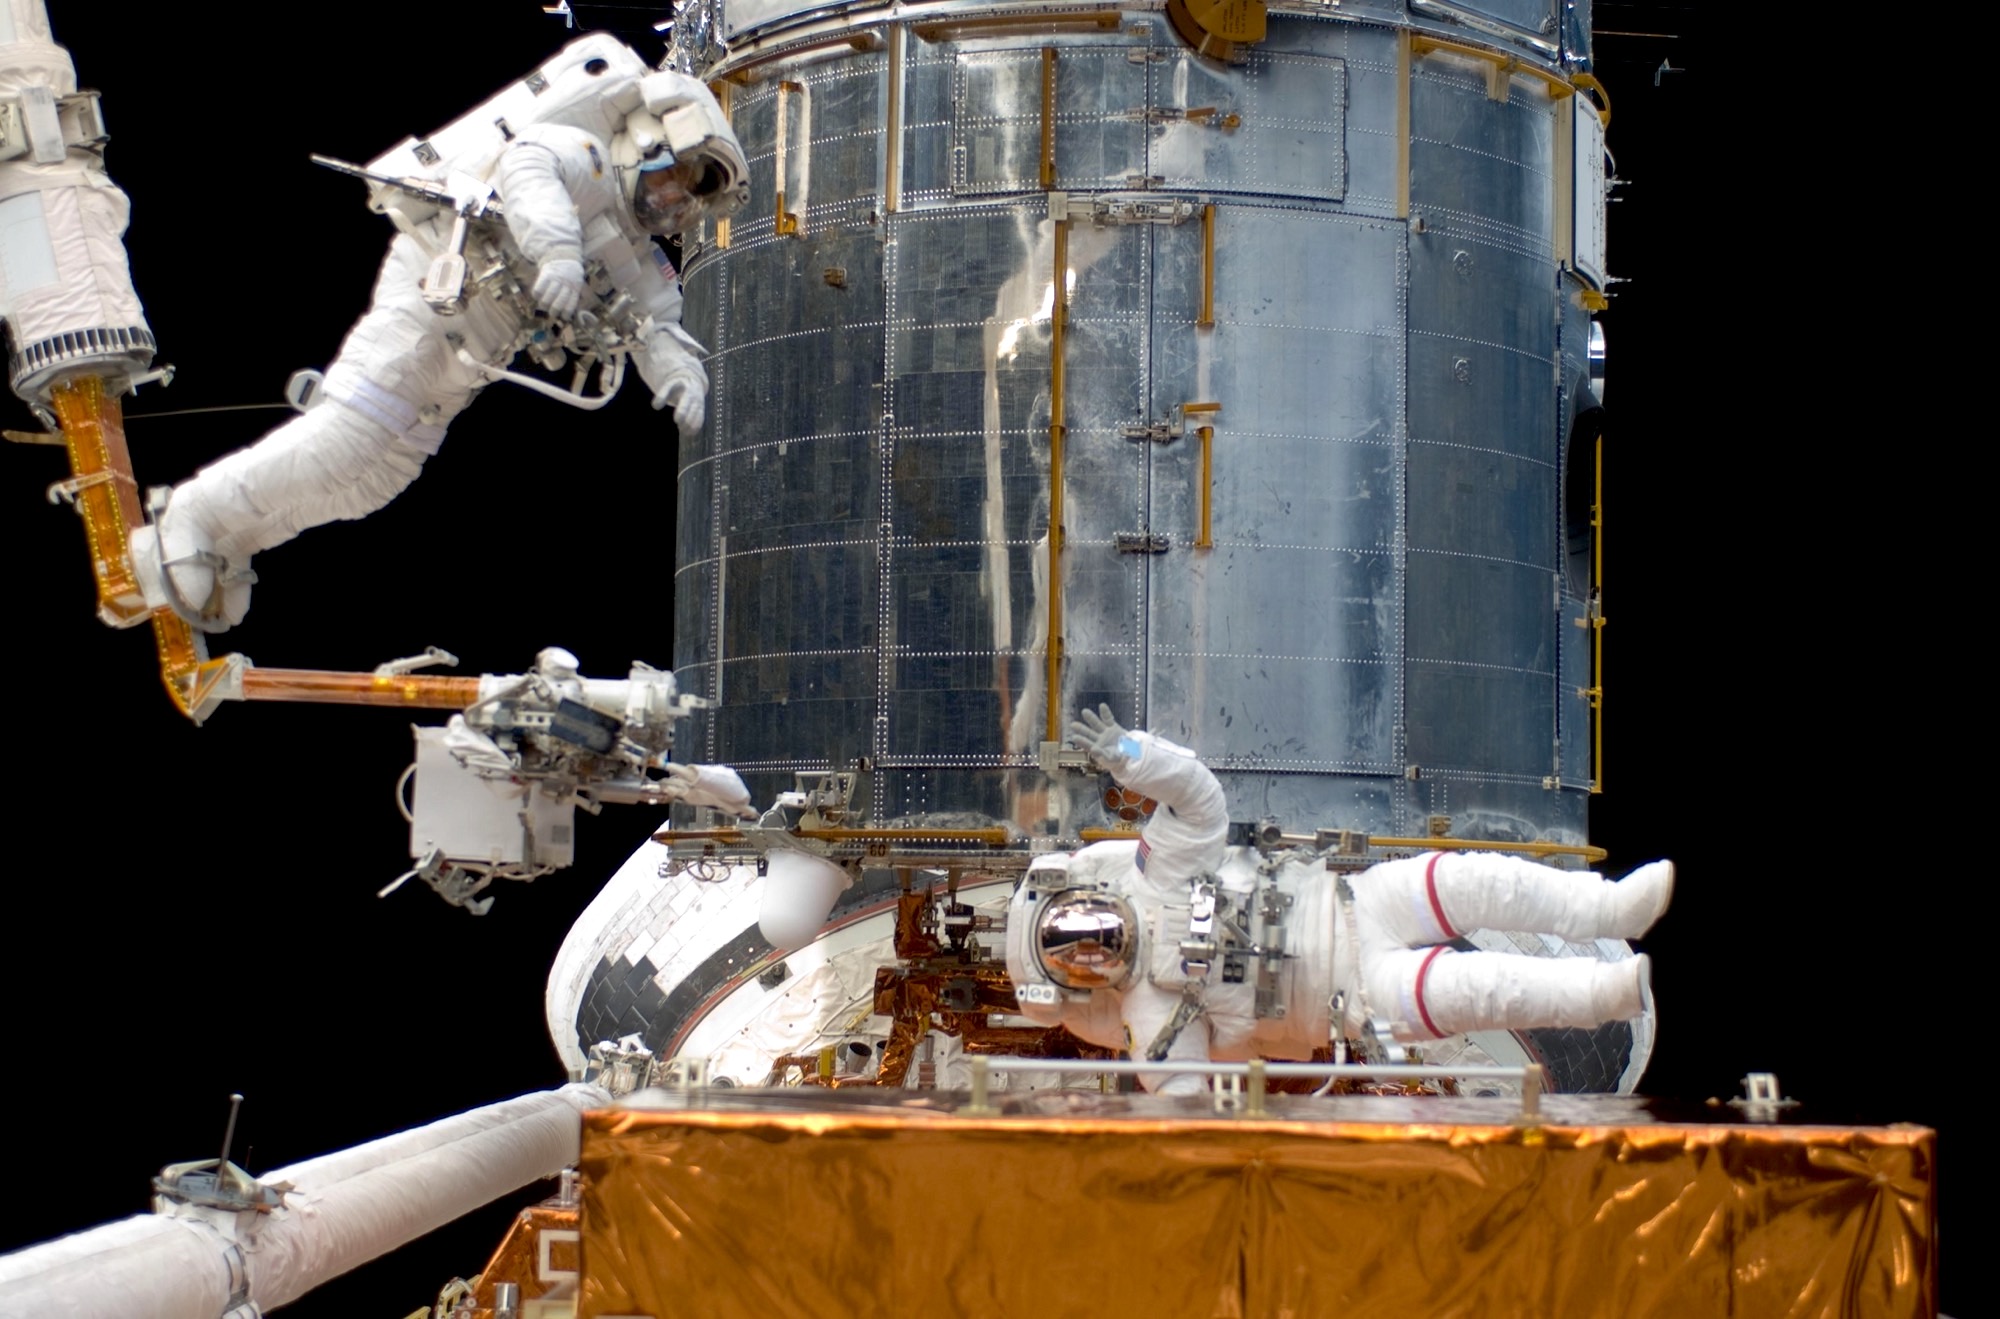 two astronauts in space repairing the hubble space telescope, behind them. the telescope is far larger than they are. one of the astronauts wave at the camera